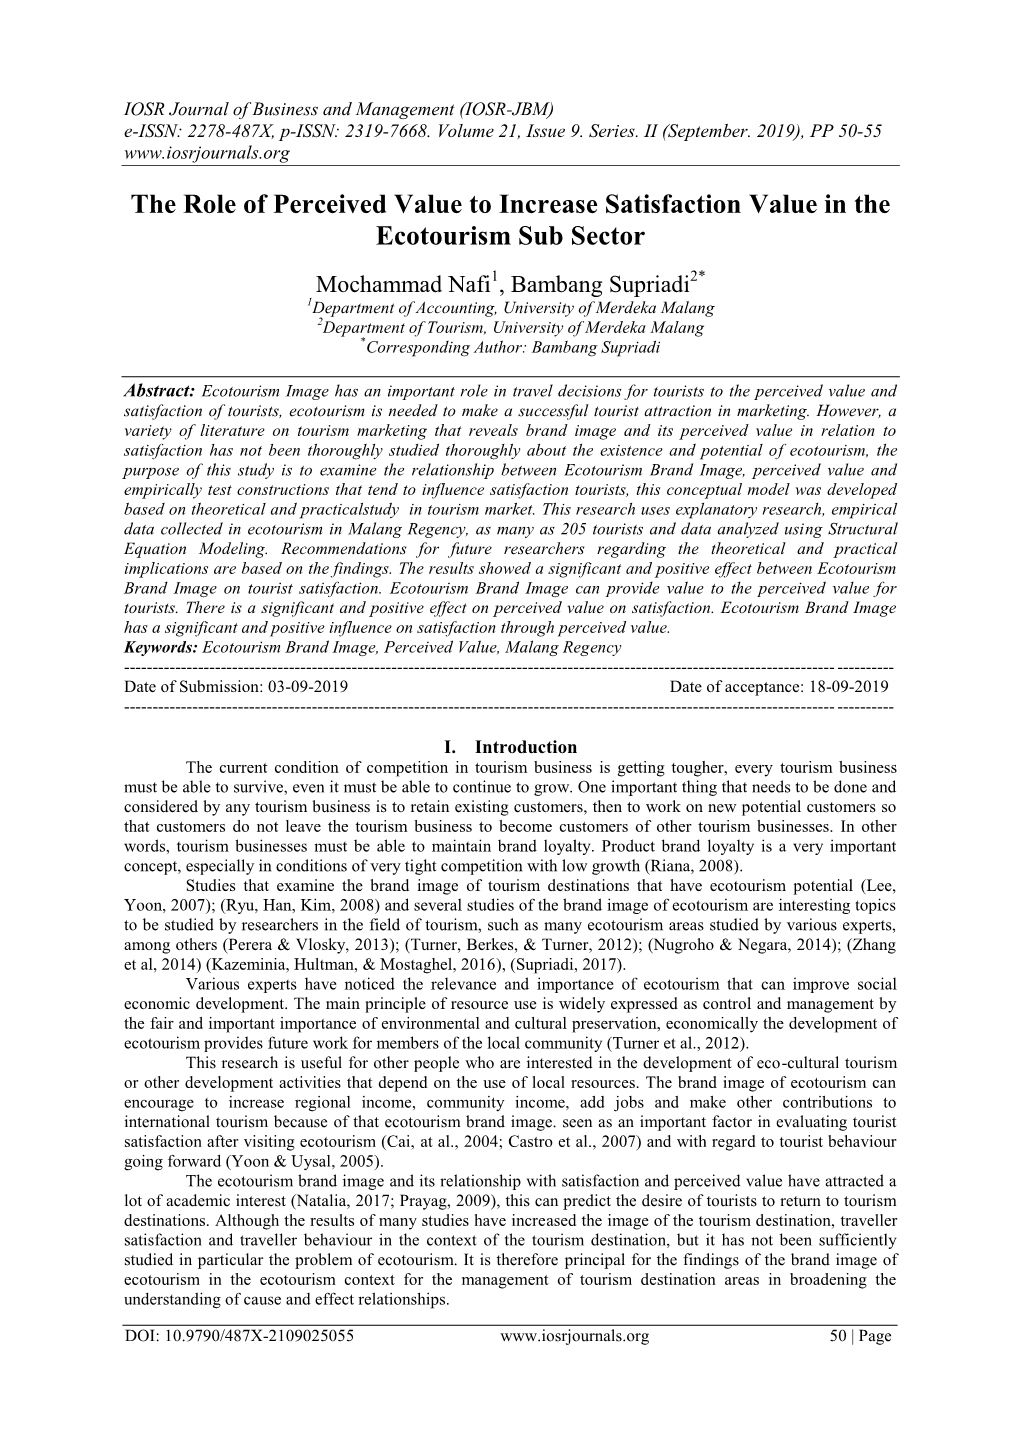 The Role of Perceived Value to Increase Satisfaction Value in the Ecotourism Sub Sector